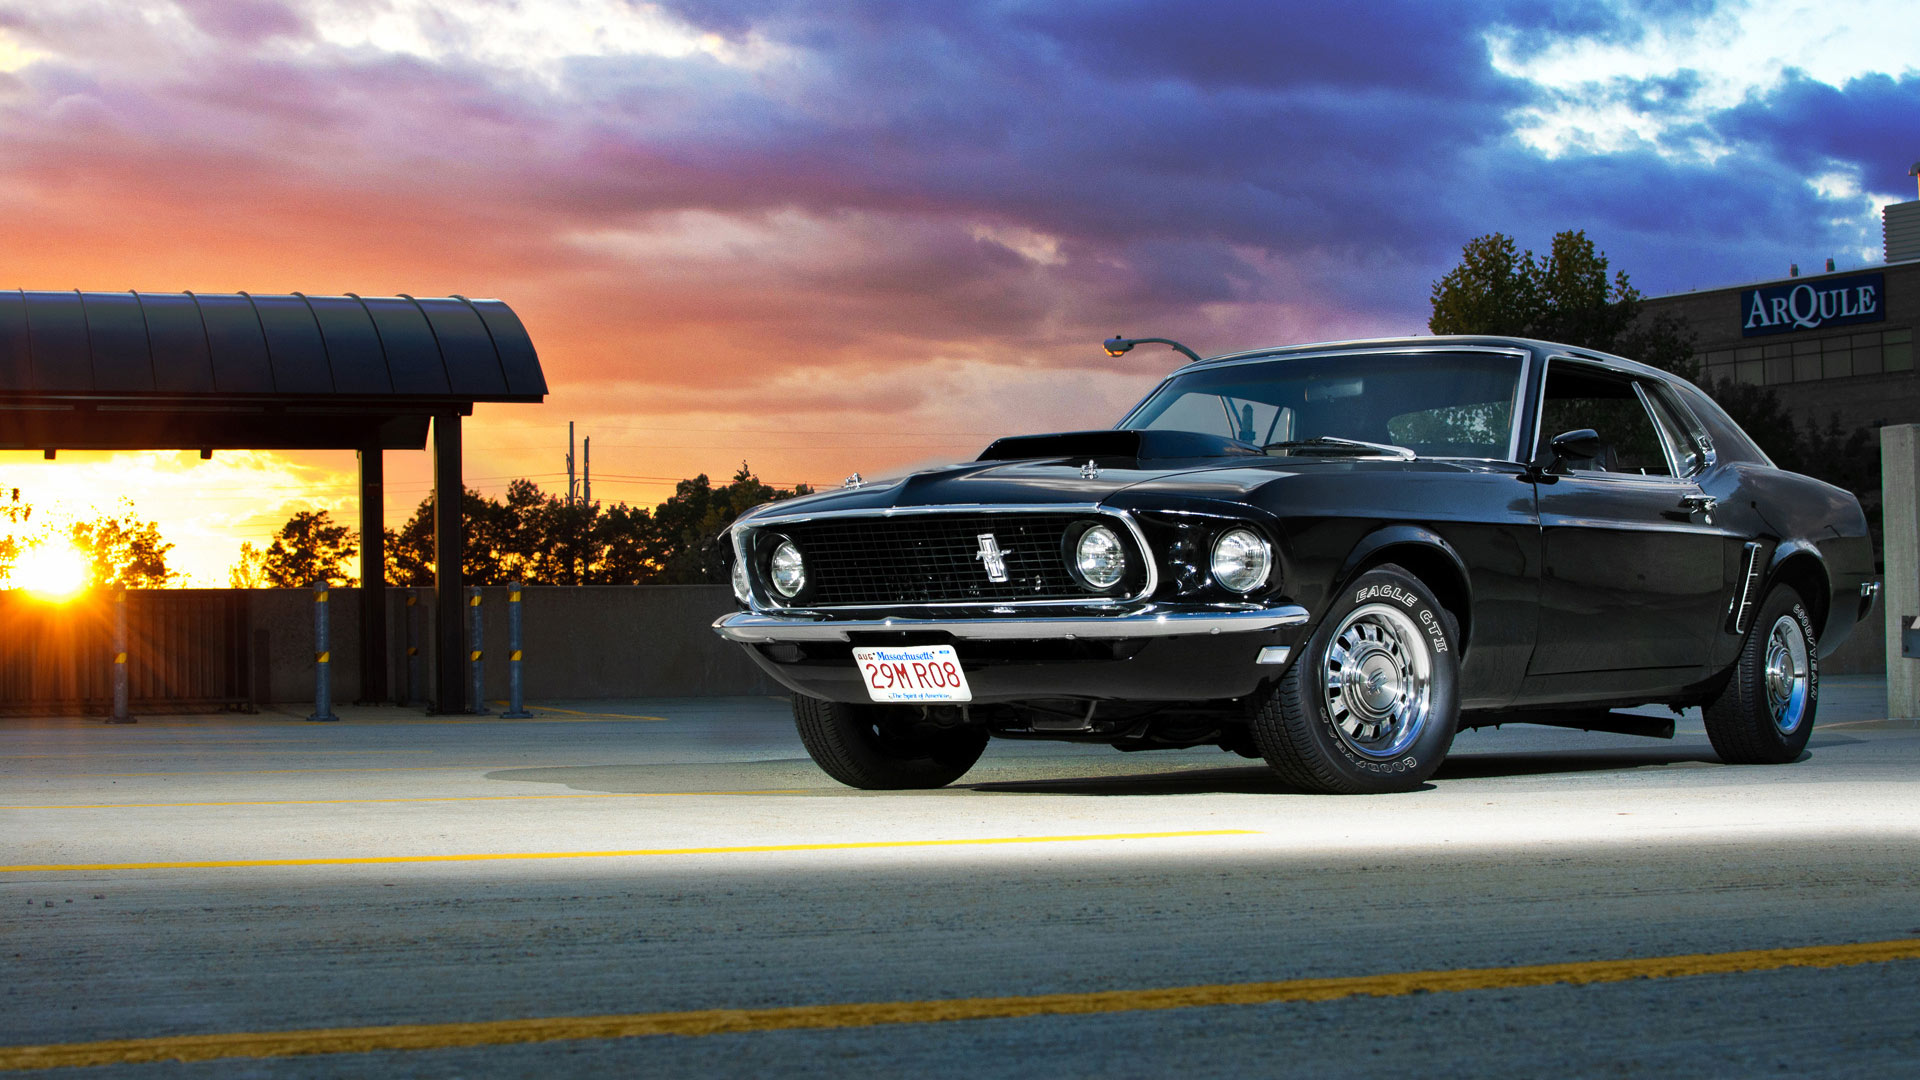 Mustang-HD-Wallpaper-High-Quality-for-laptop-15